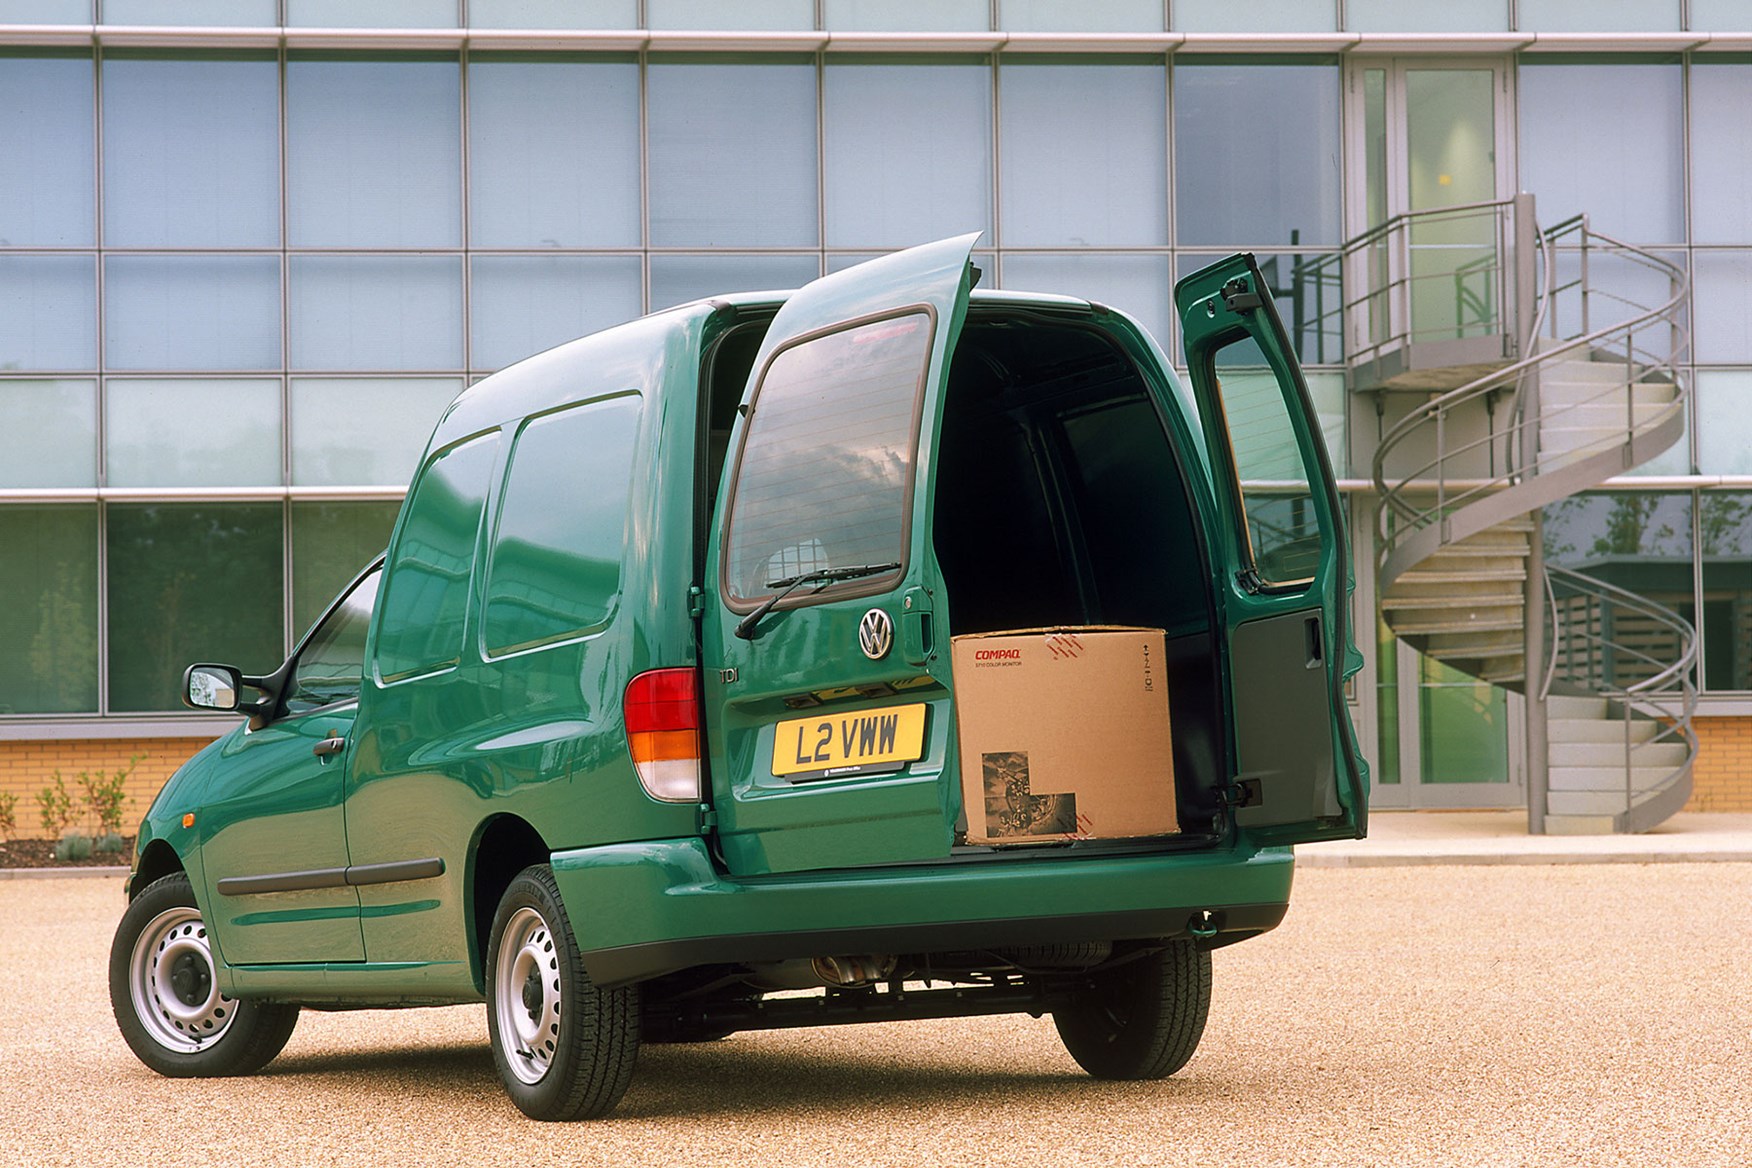 VW Caddy (1996-2003) load area